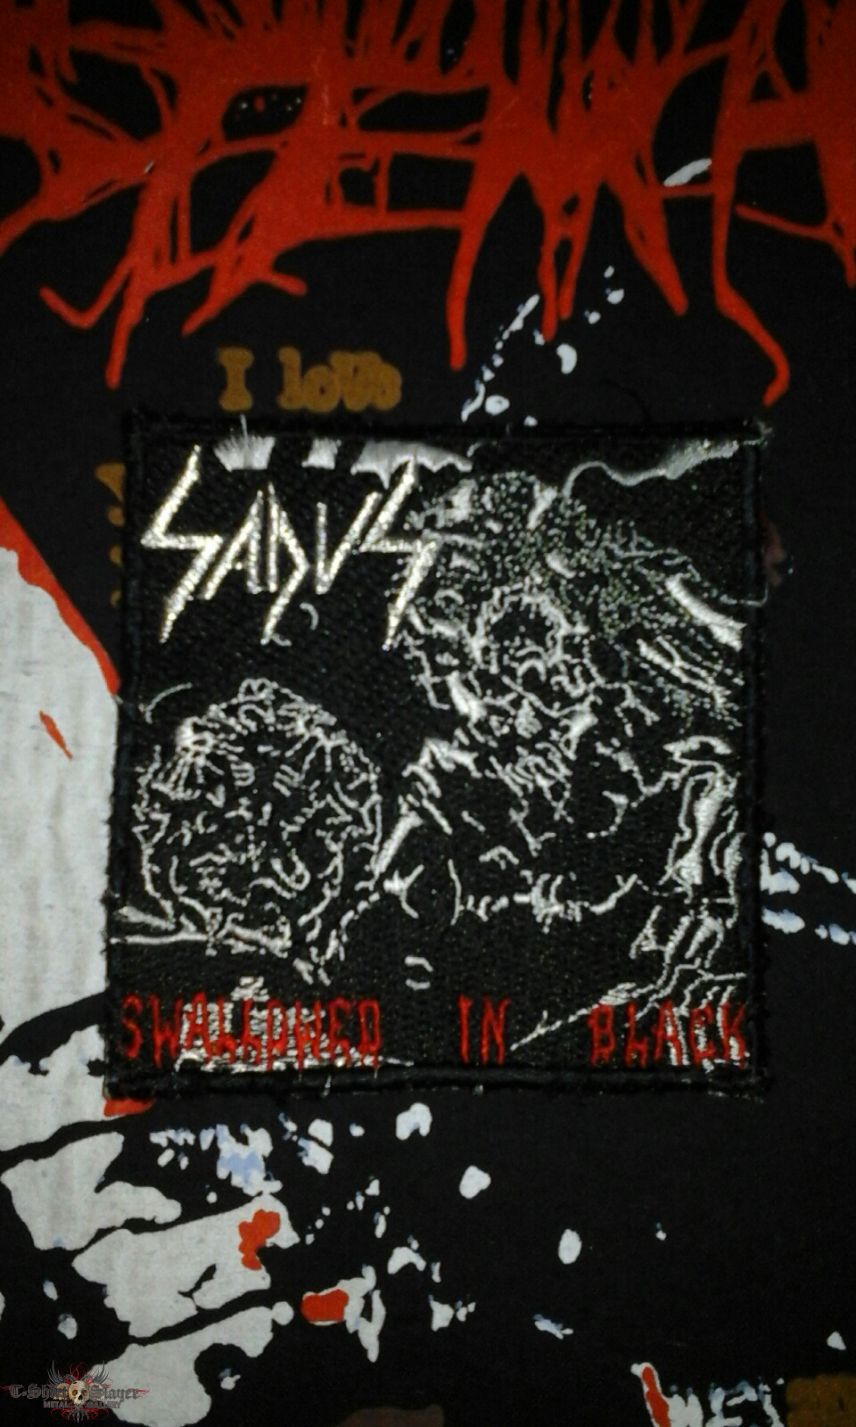 Sadus - Swallowed In Black embroidered iron on patch